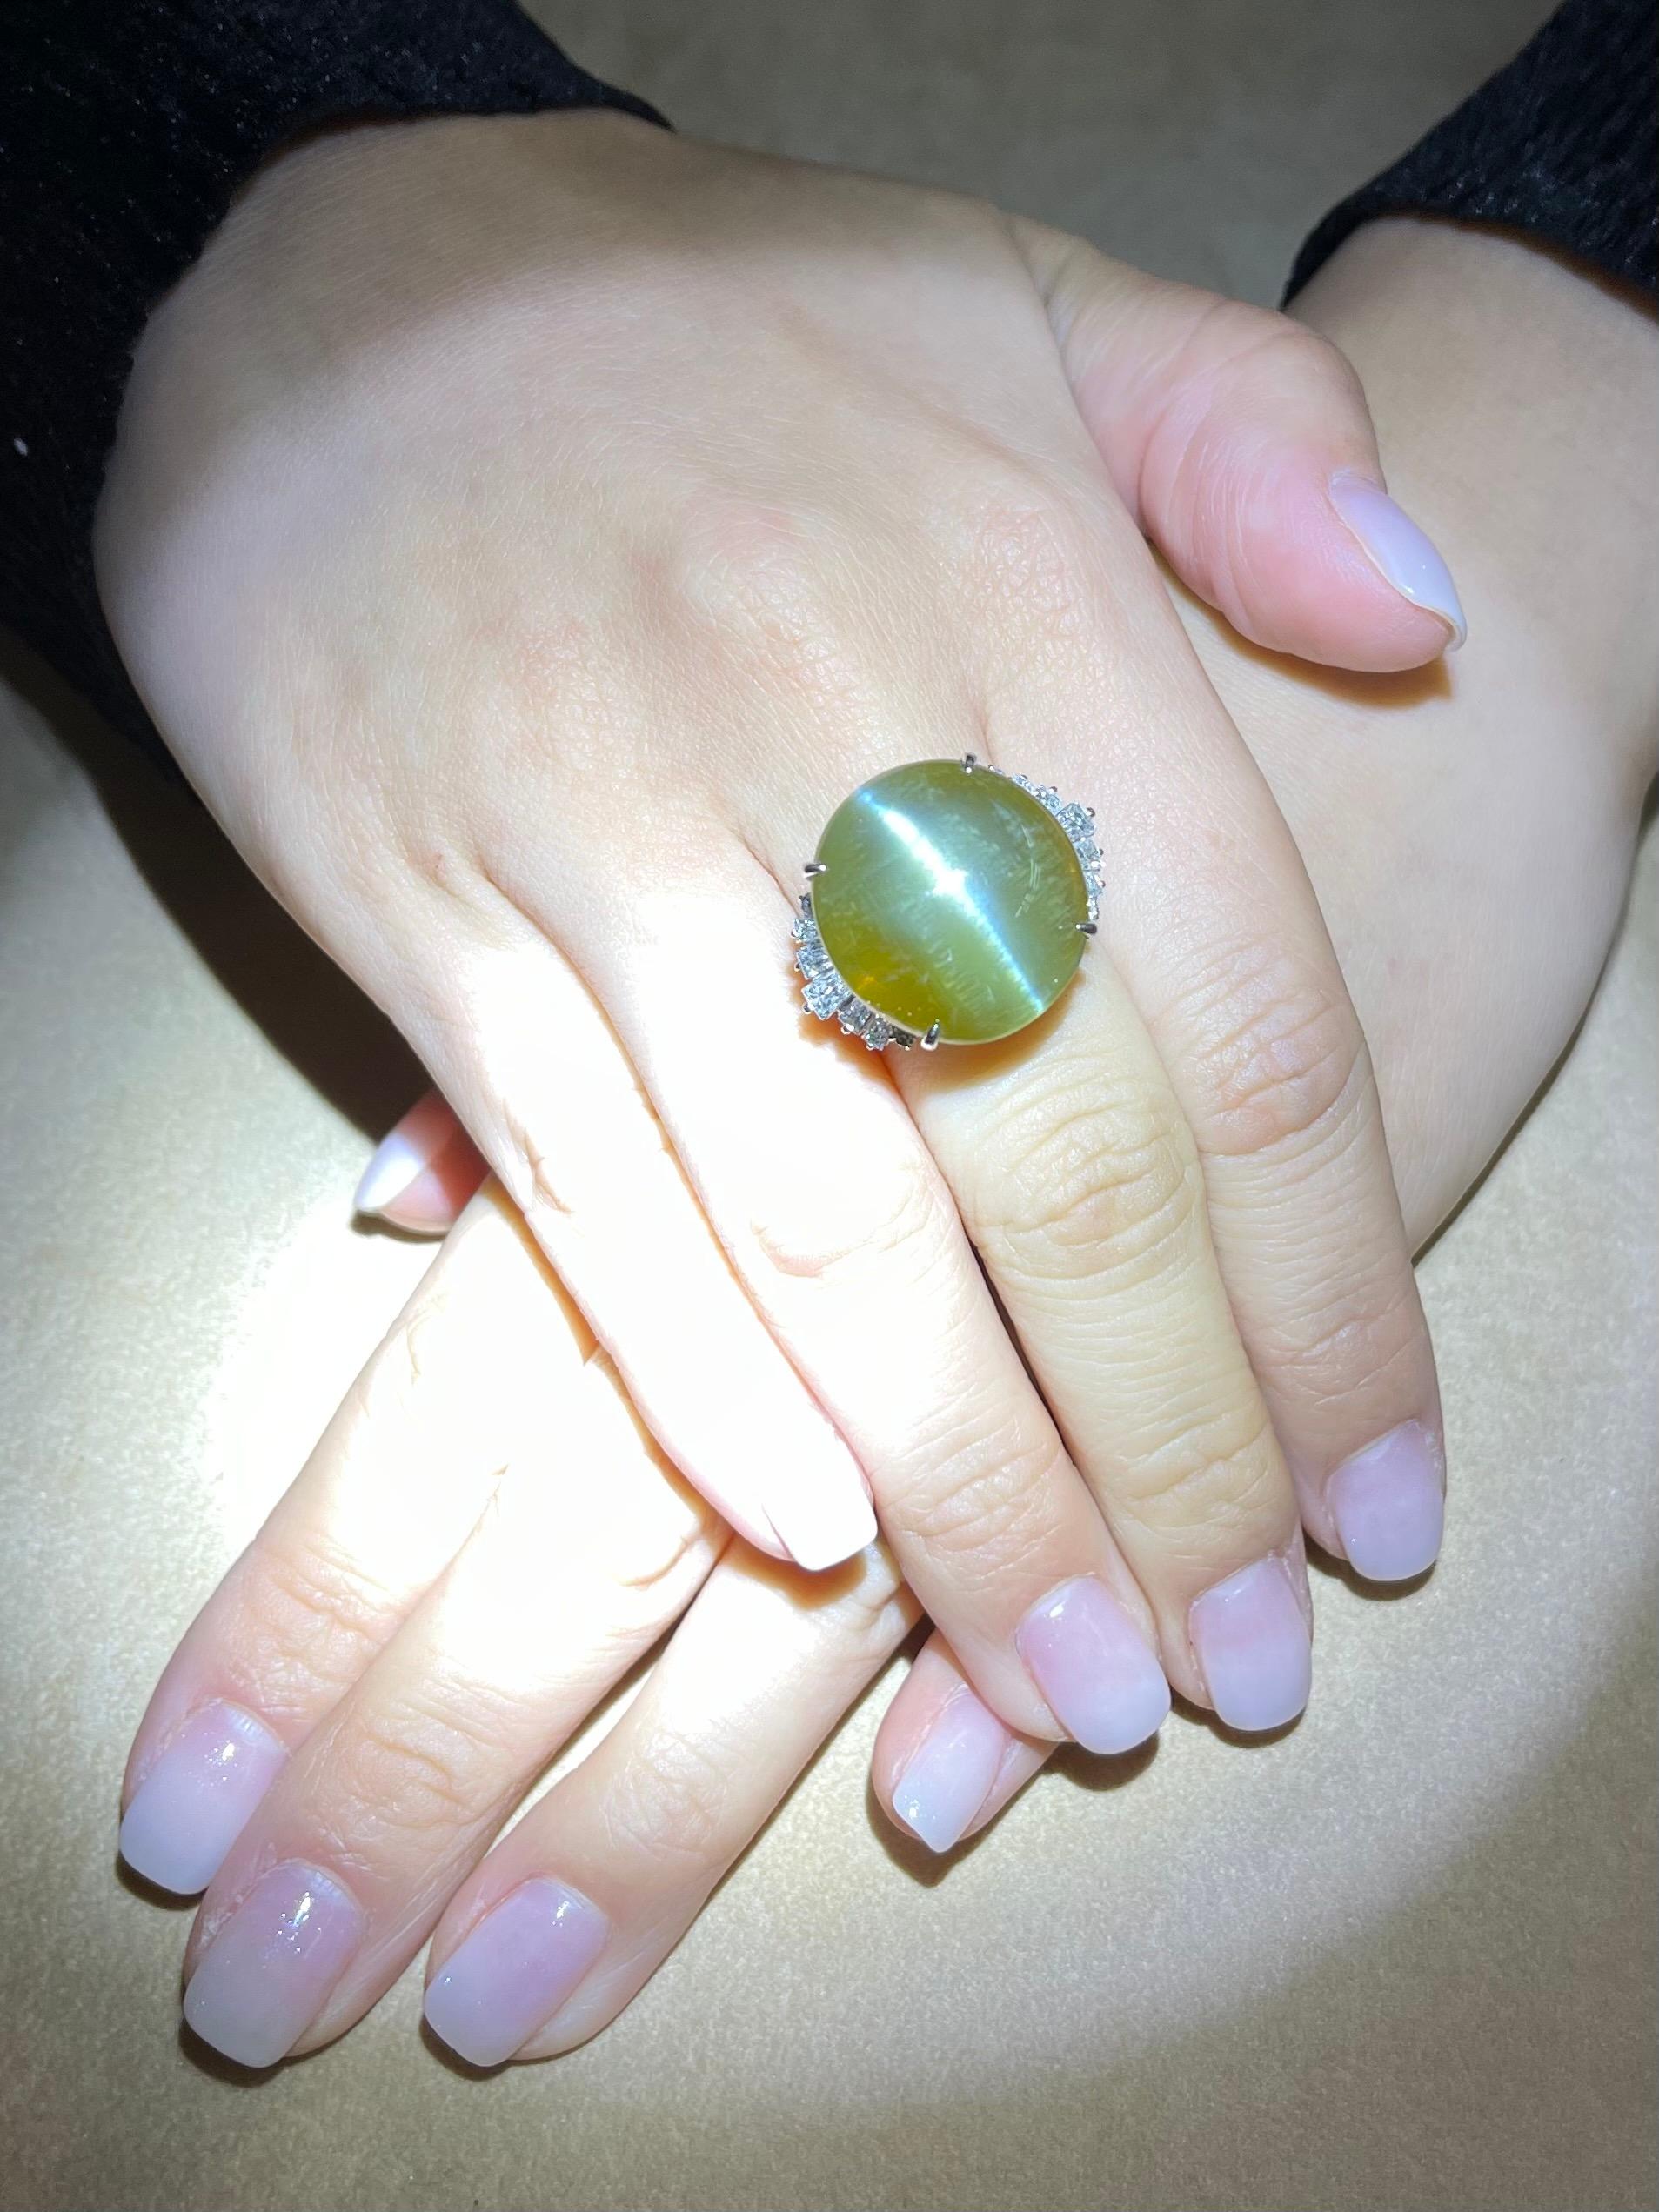 Please check out the HD video. Here is a GRS certified natural cat's eye chrysoberyl. It exhibits strong chatoyancy or cat's eye effect. The honey yellowish green color is also highly sought after. It is certified no heat treatment. The setting is